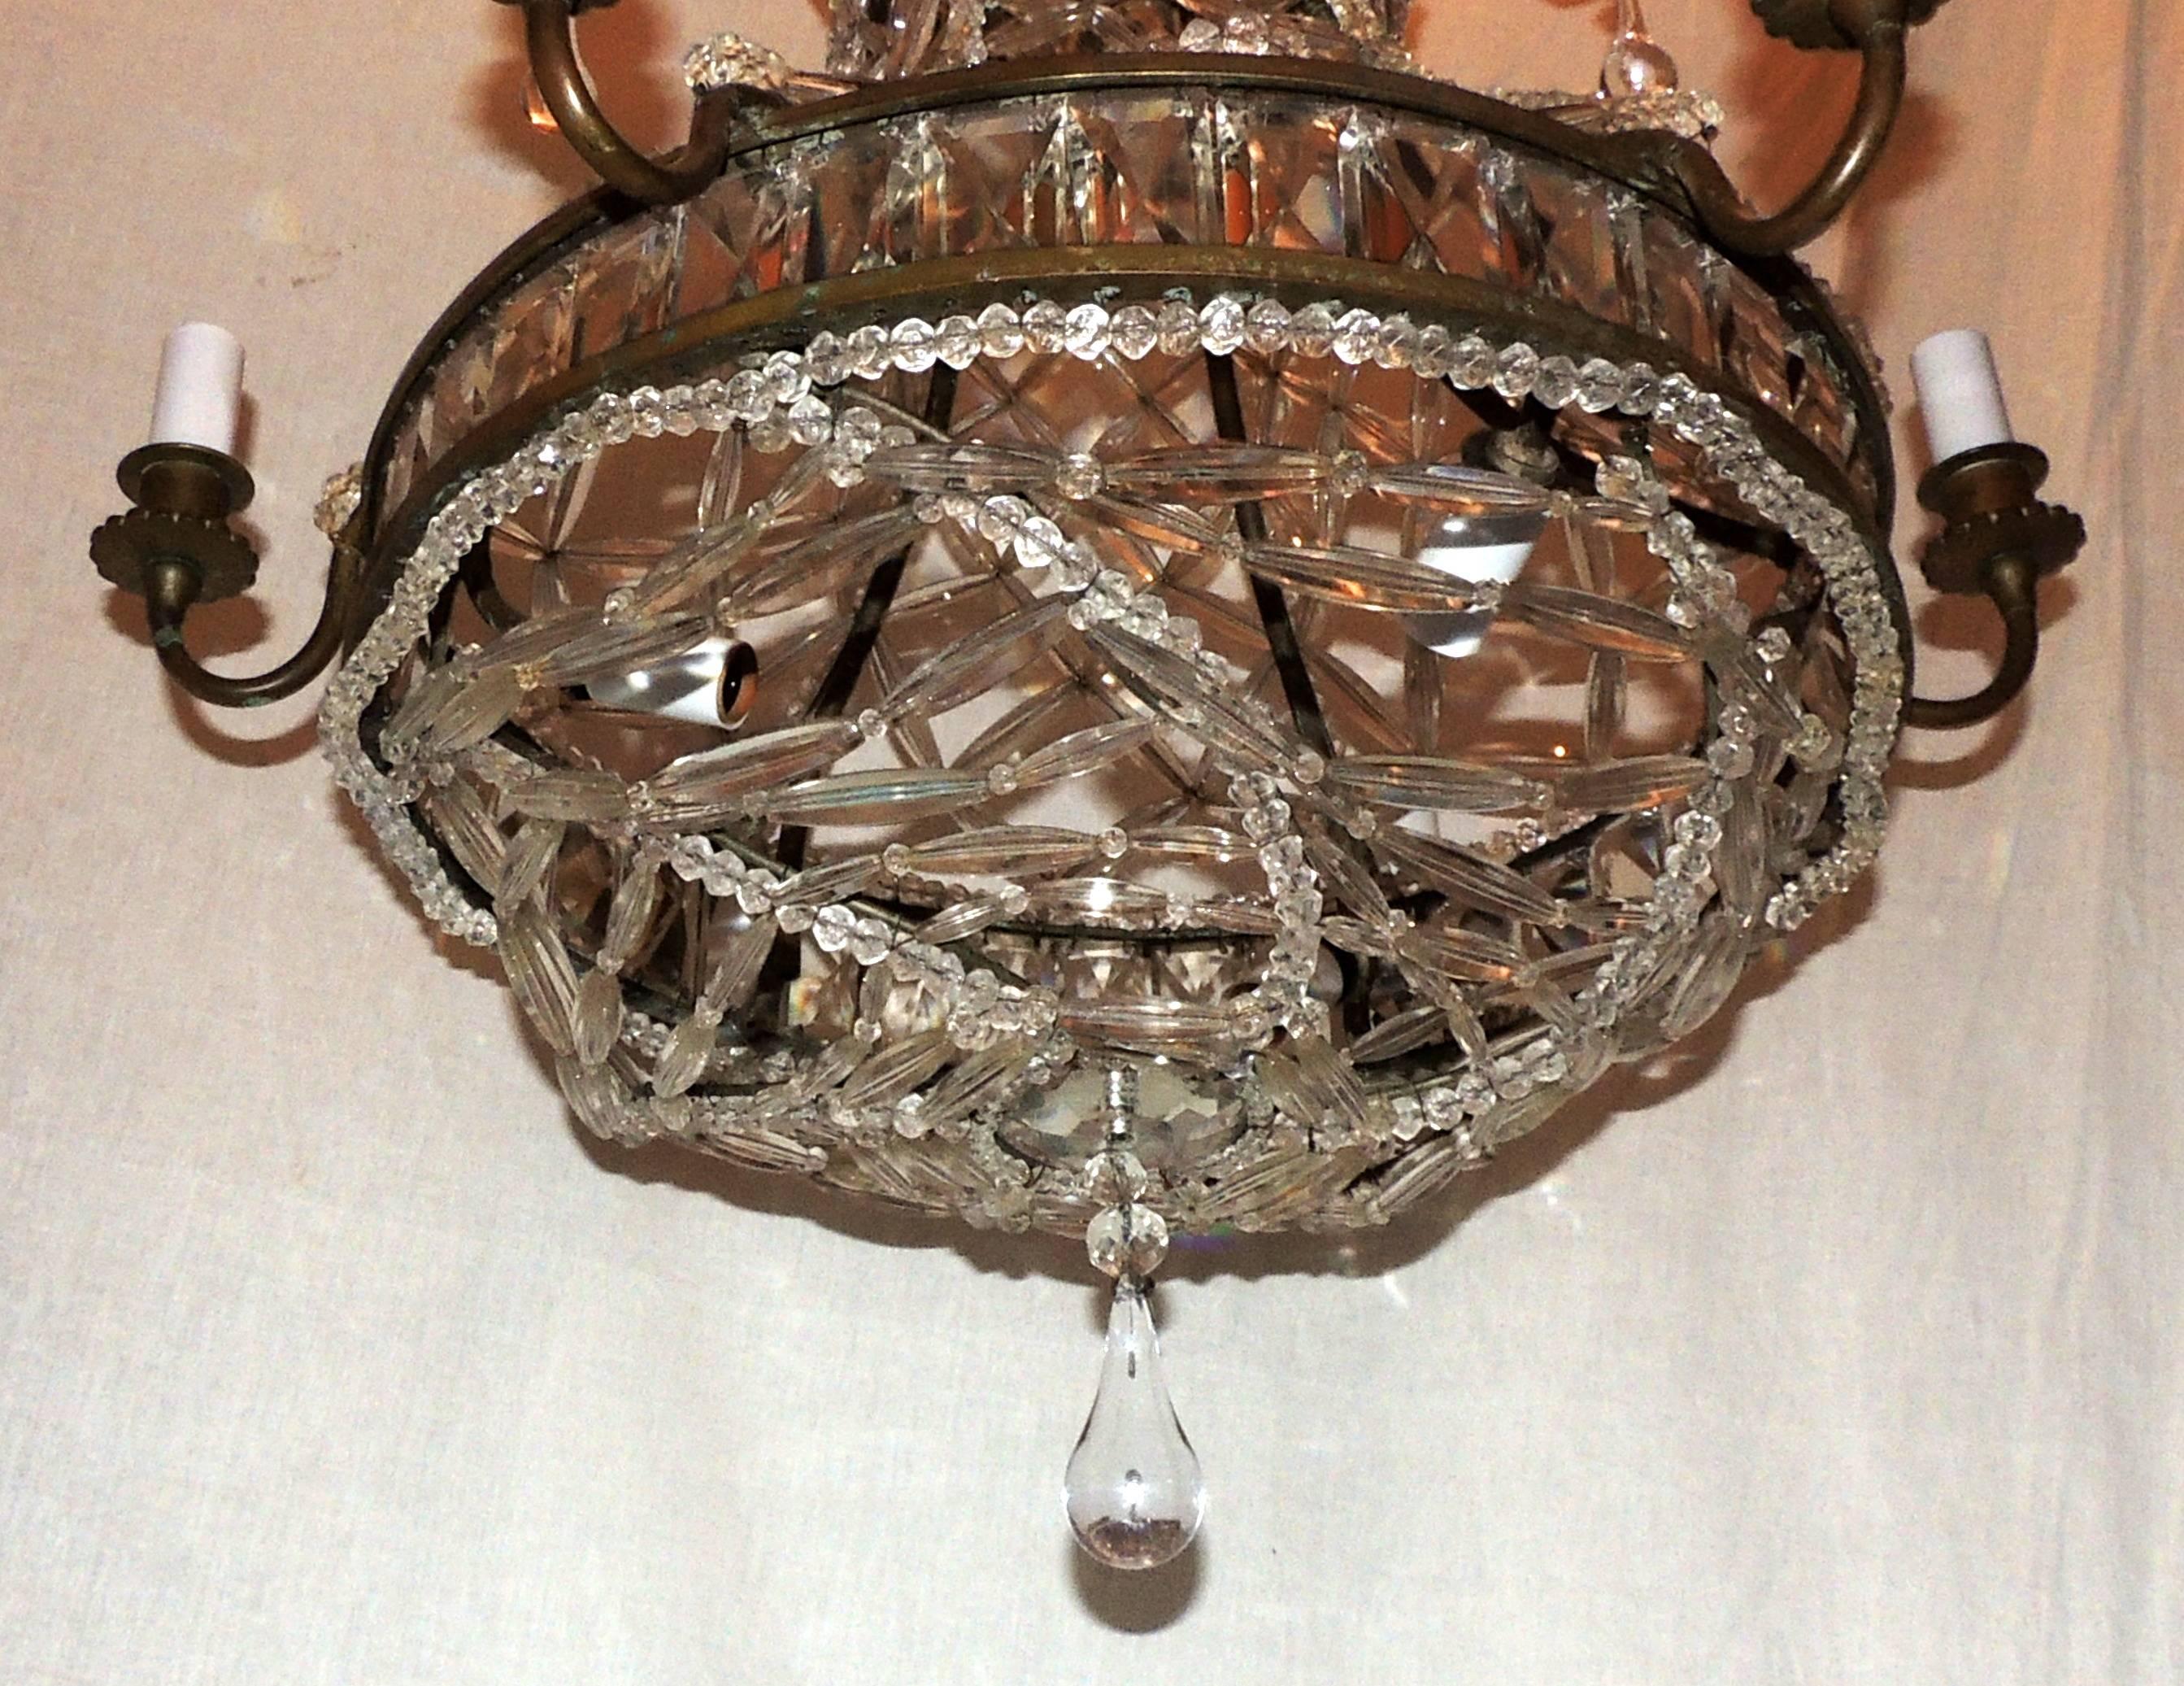 A wonderful French bronze and crystal lattice form beaded basket chandelier with tear drop crystals.
This beautiful fixture has six lights around the outside band and also has three internal lights.
Measures: 22